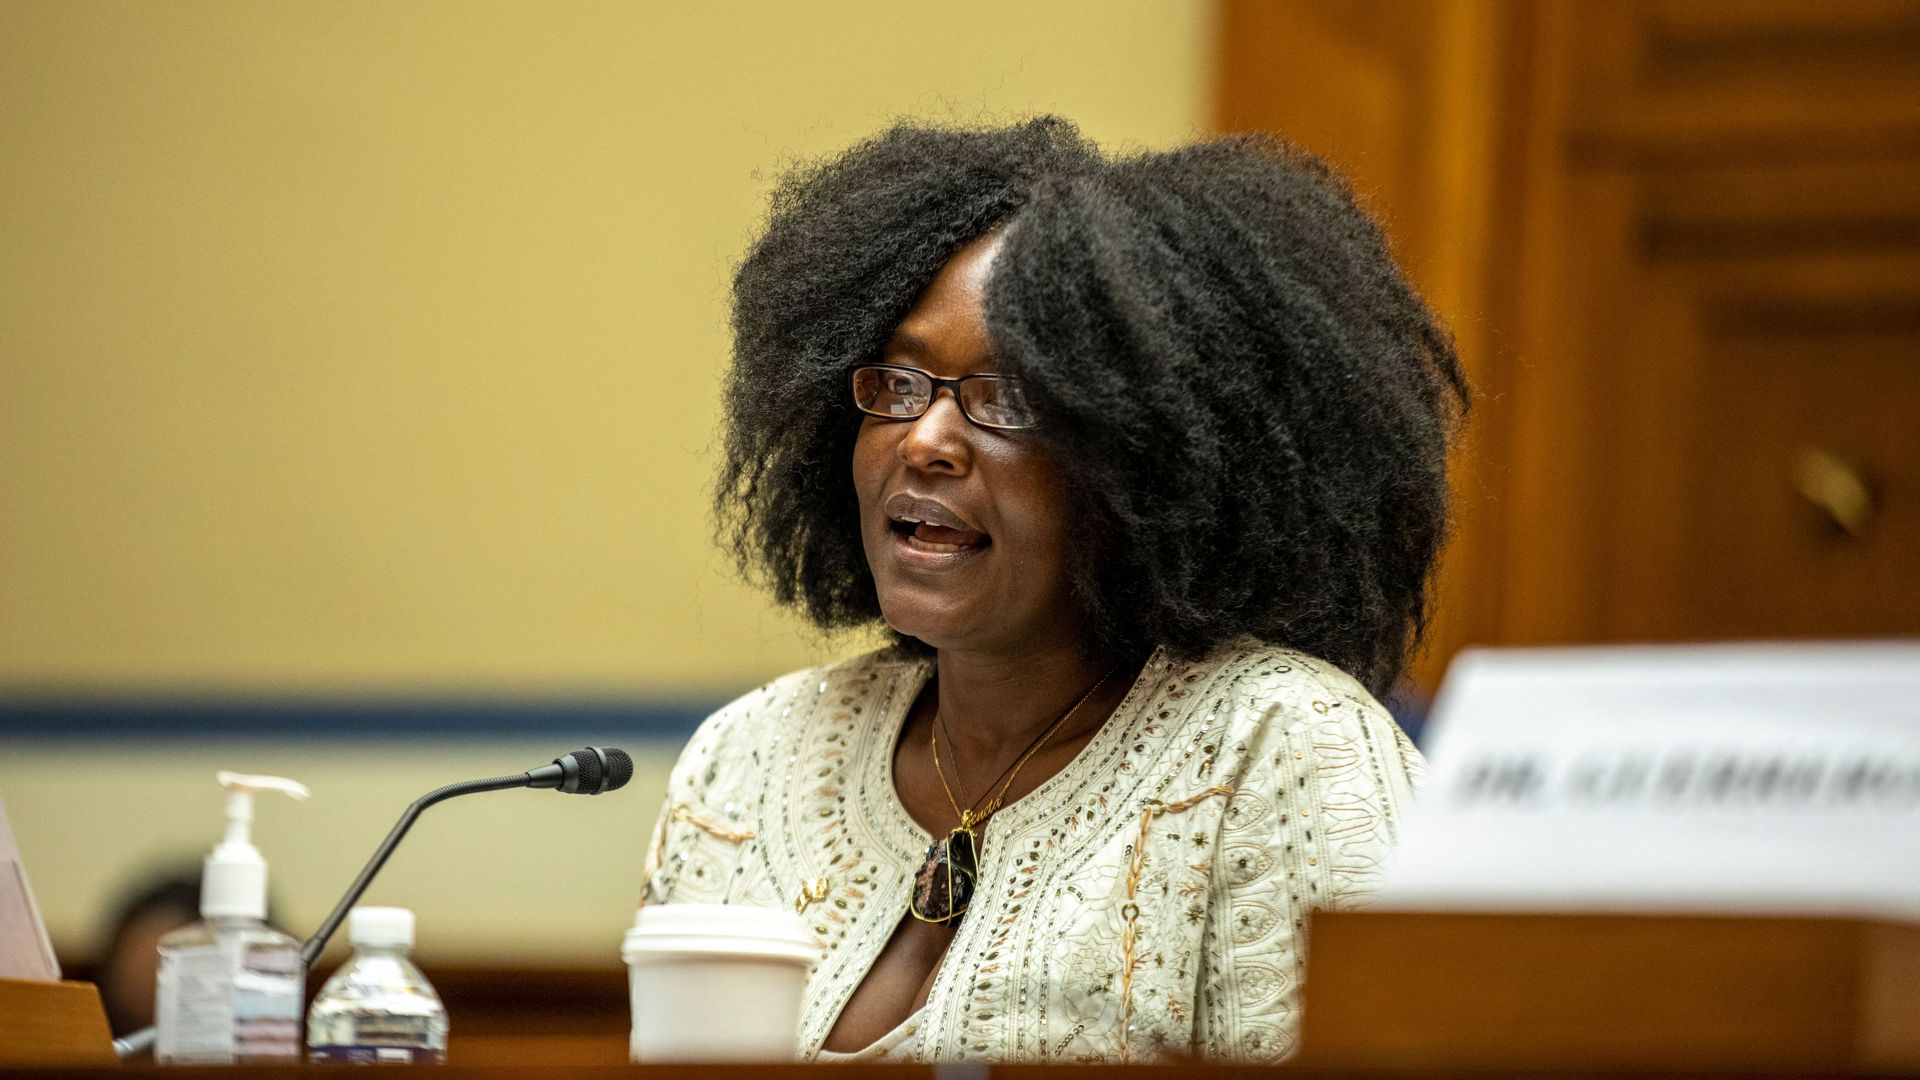 eneta Everhart, whose son Zaire Goodman, 20, was shot in the neck during the Buffalo Tops supermarket mass shooting and survived, testifies during a House Committee on Oversight and Reform.